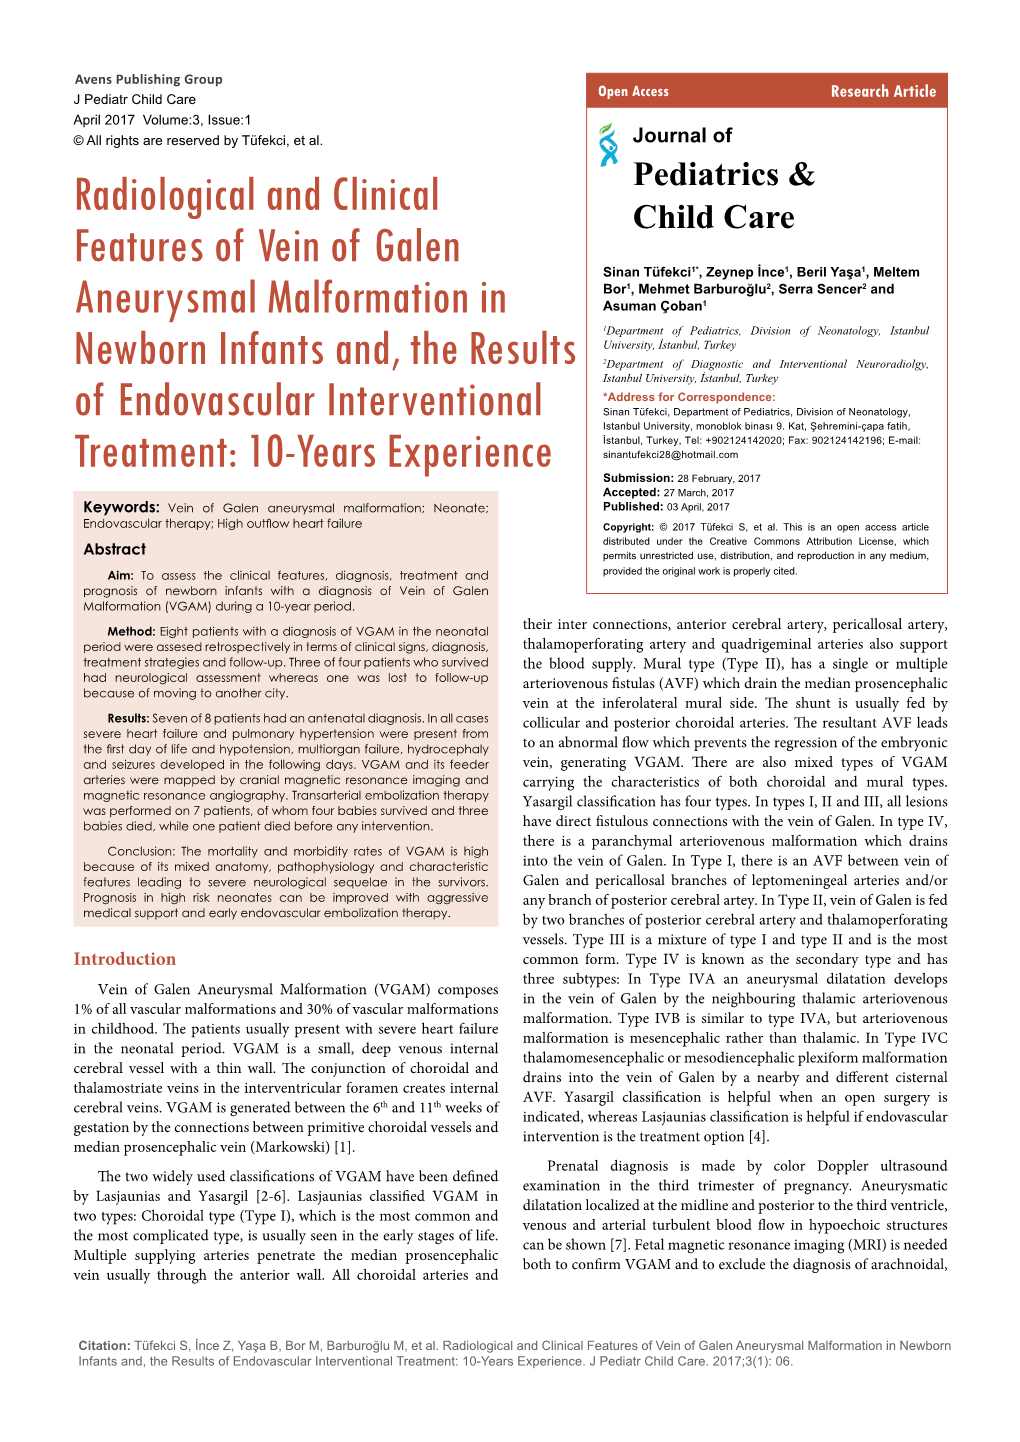 Radiological and Clinical Features of Vein of Galen Aneurysmal